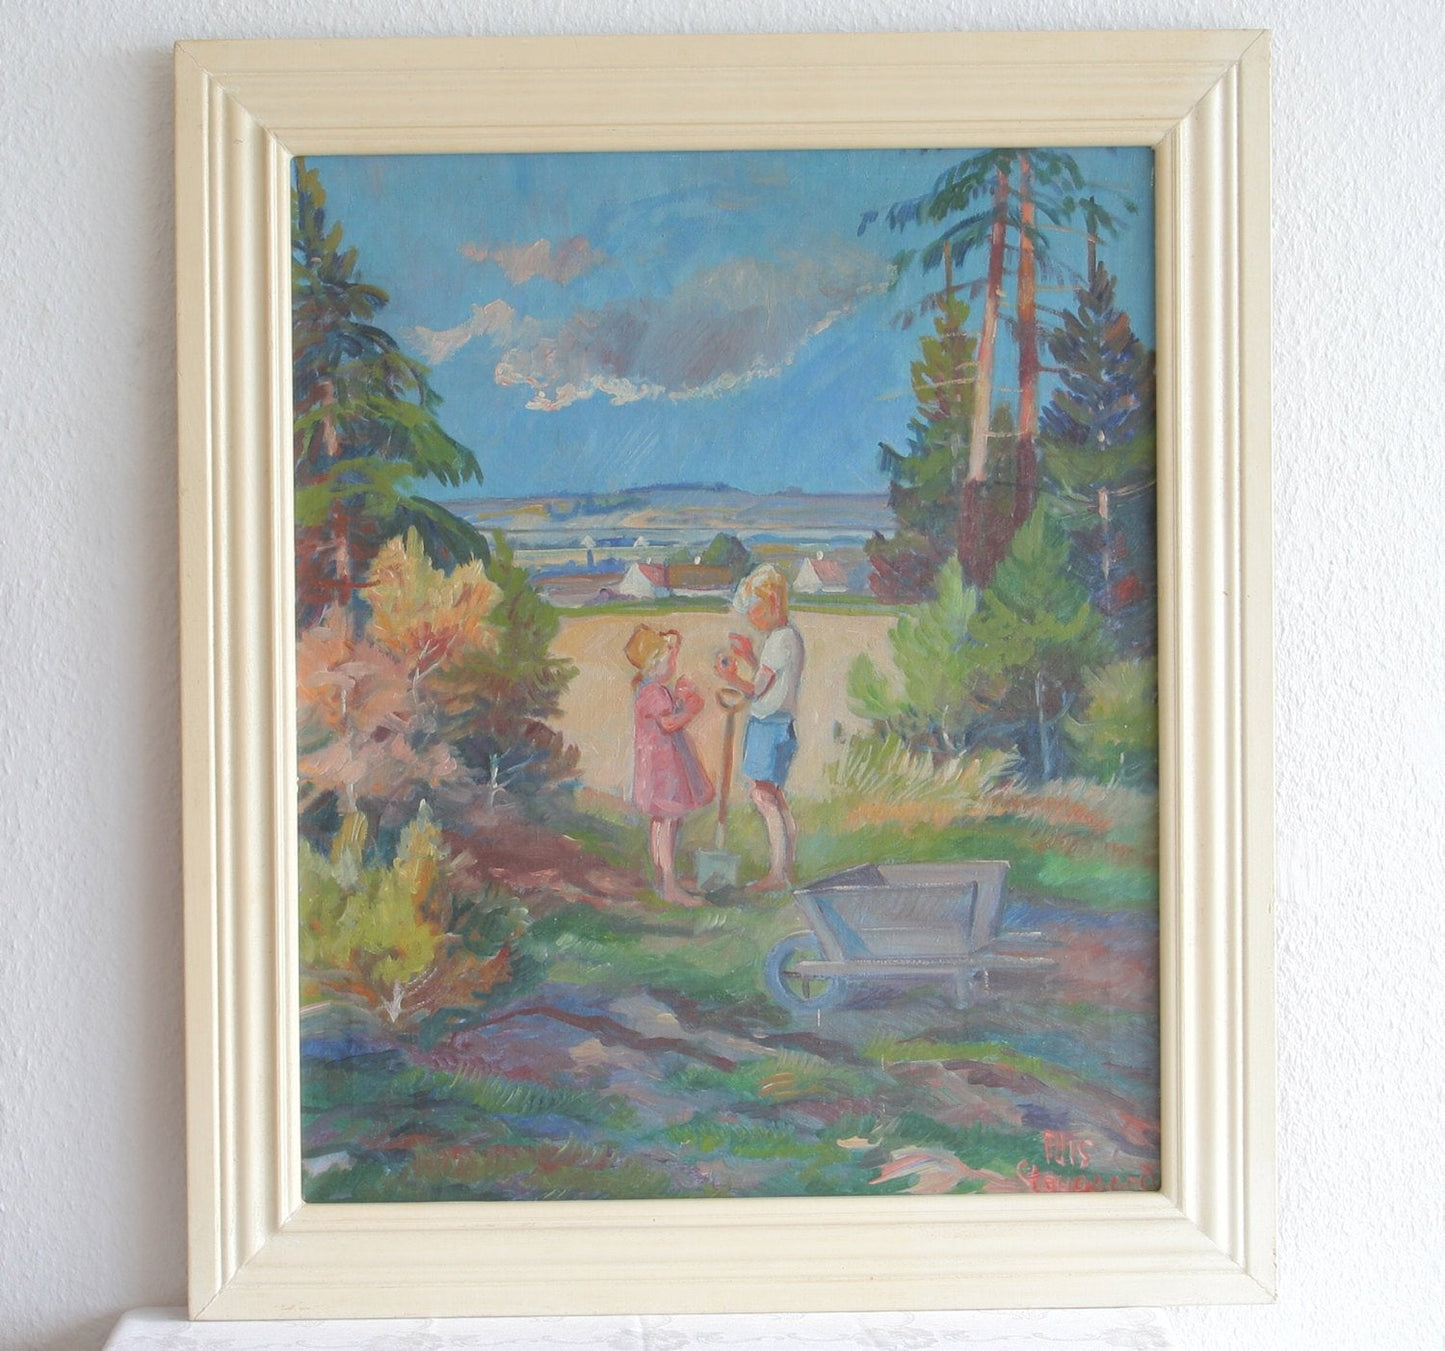 NIS STOUGAARD Children in a Field on Bornholm Painting Mollaris.com 